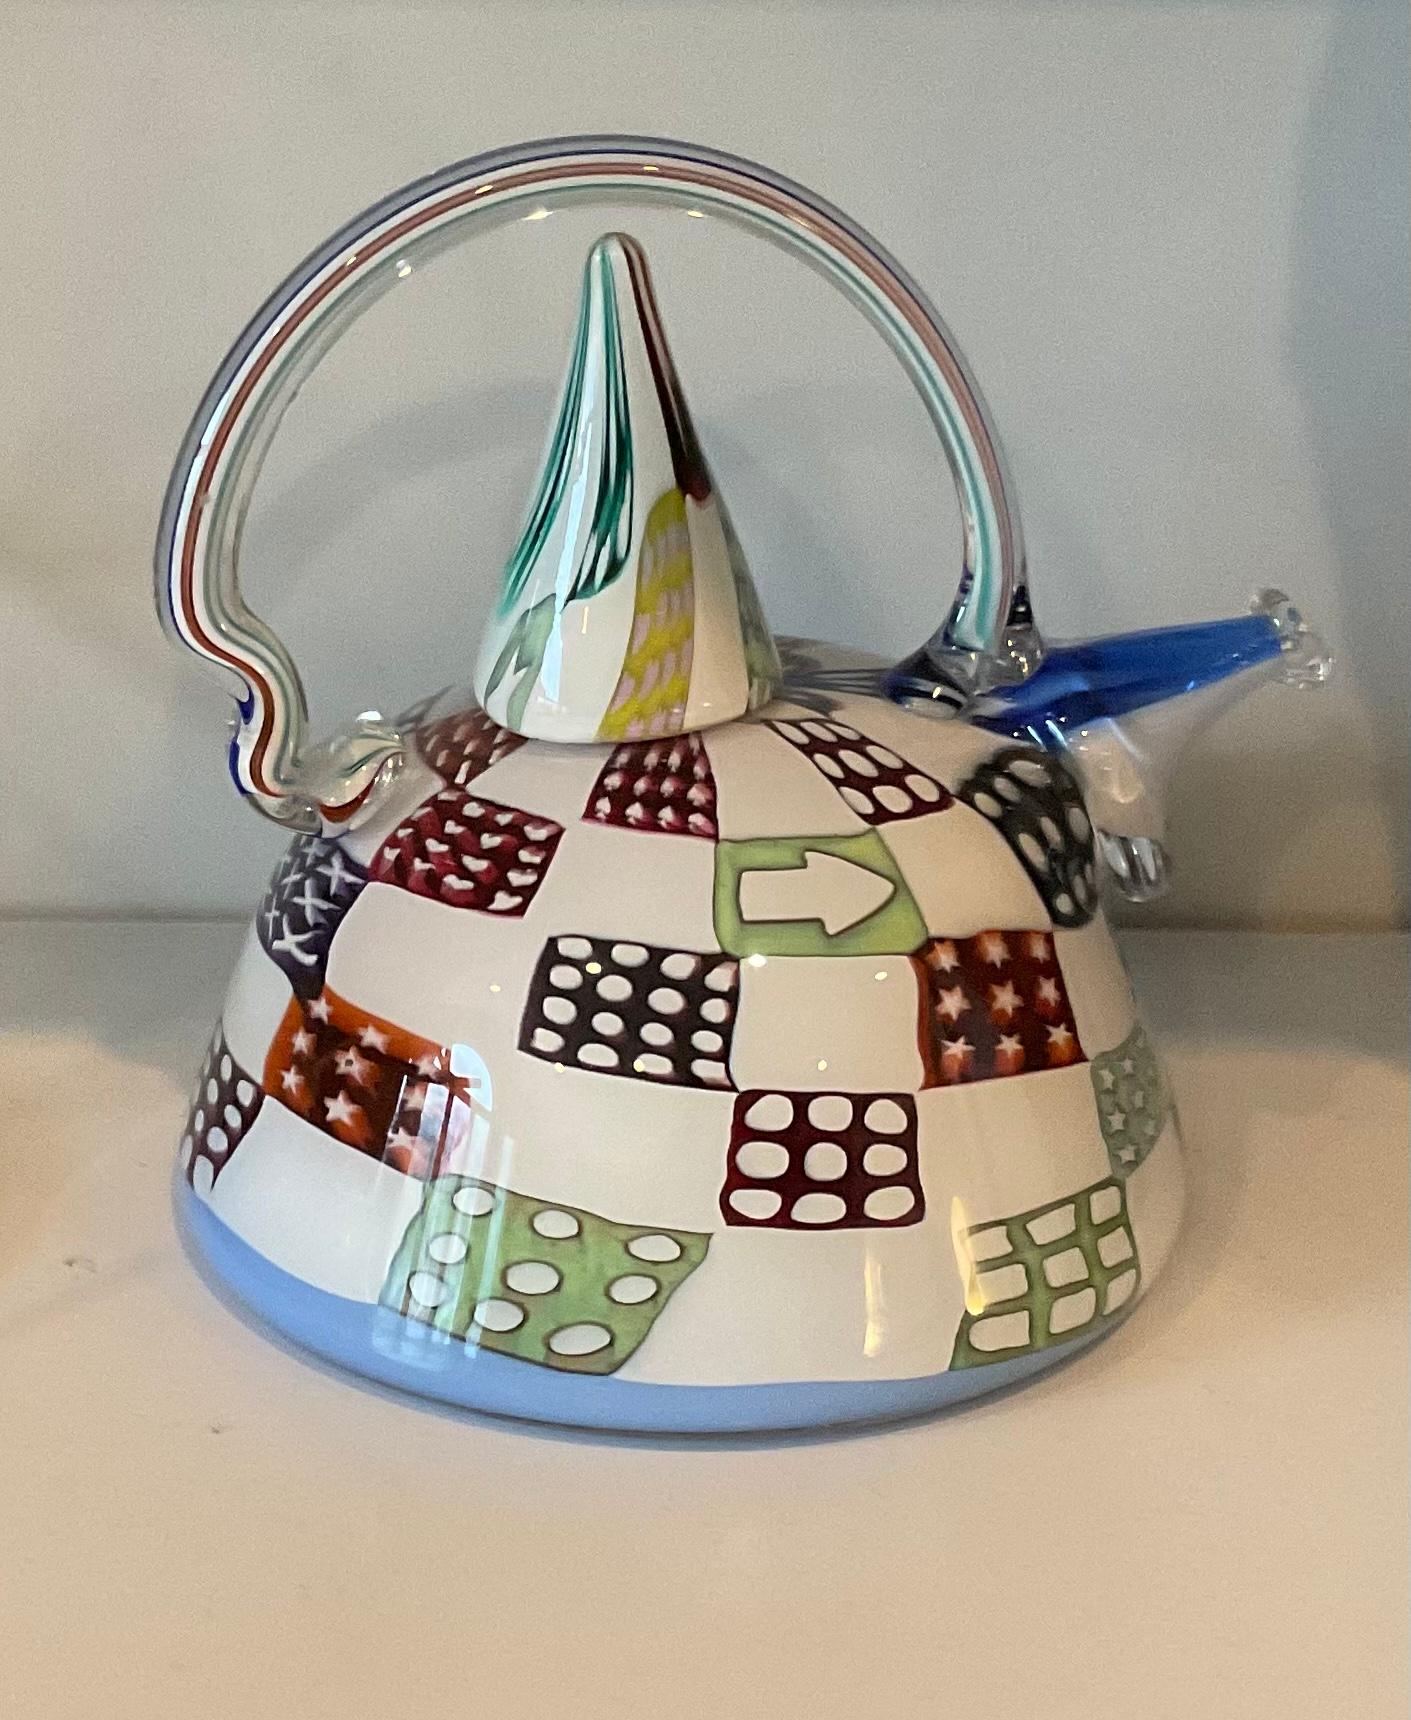 Late 20th Century Richard Marquis Studio Glass Patchwork Murrine Teapot Signed and Dated by Artist